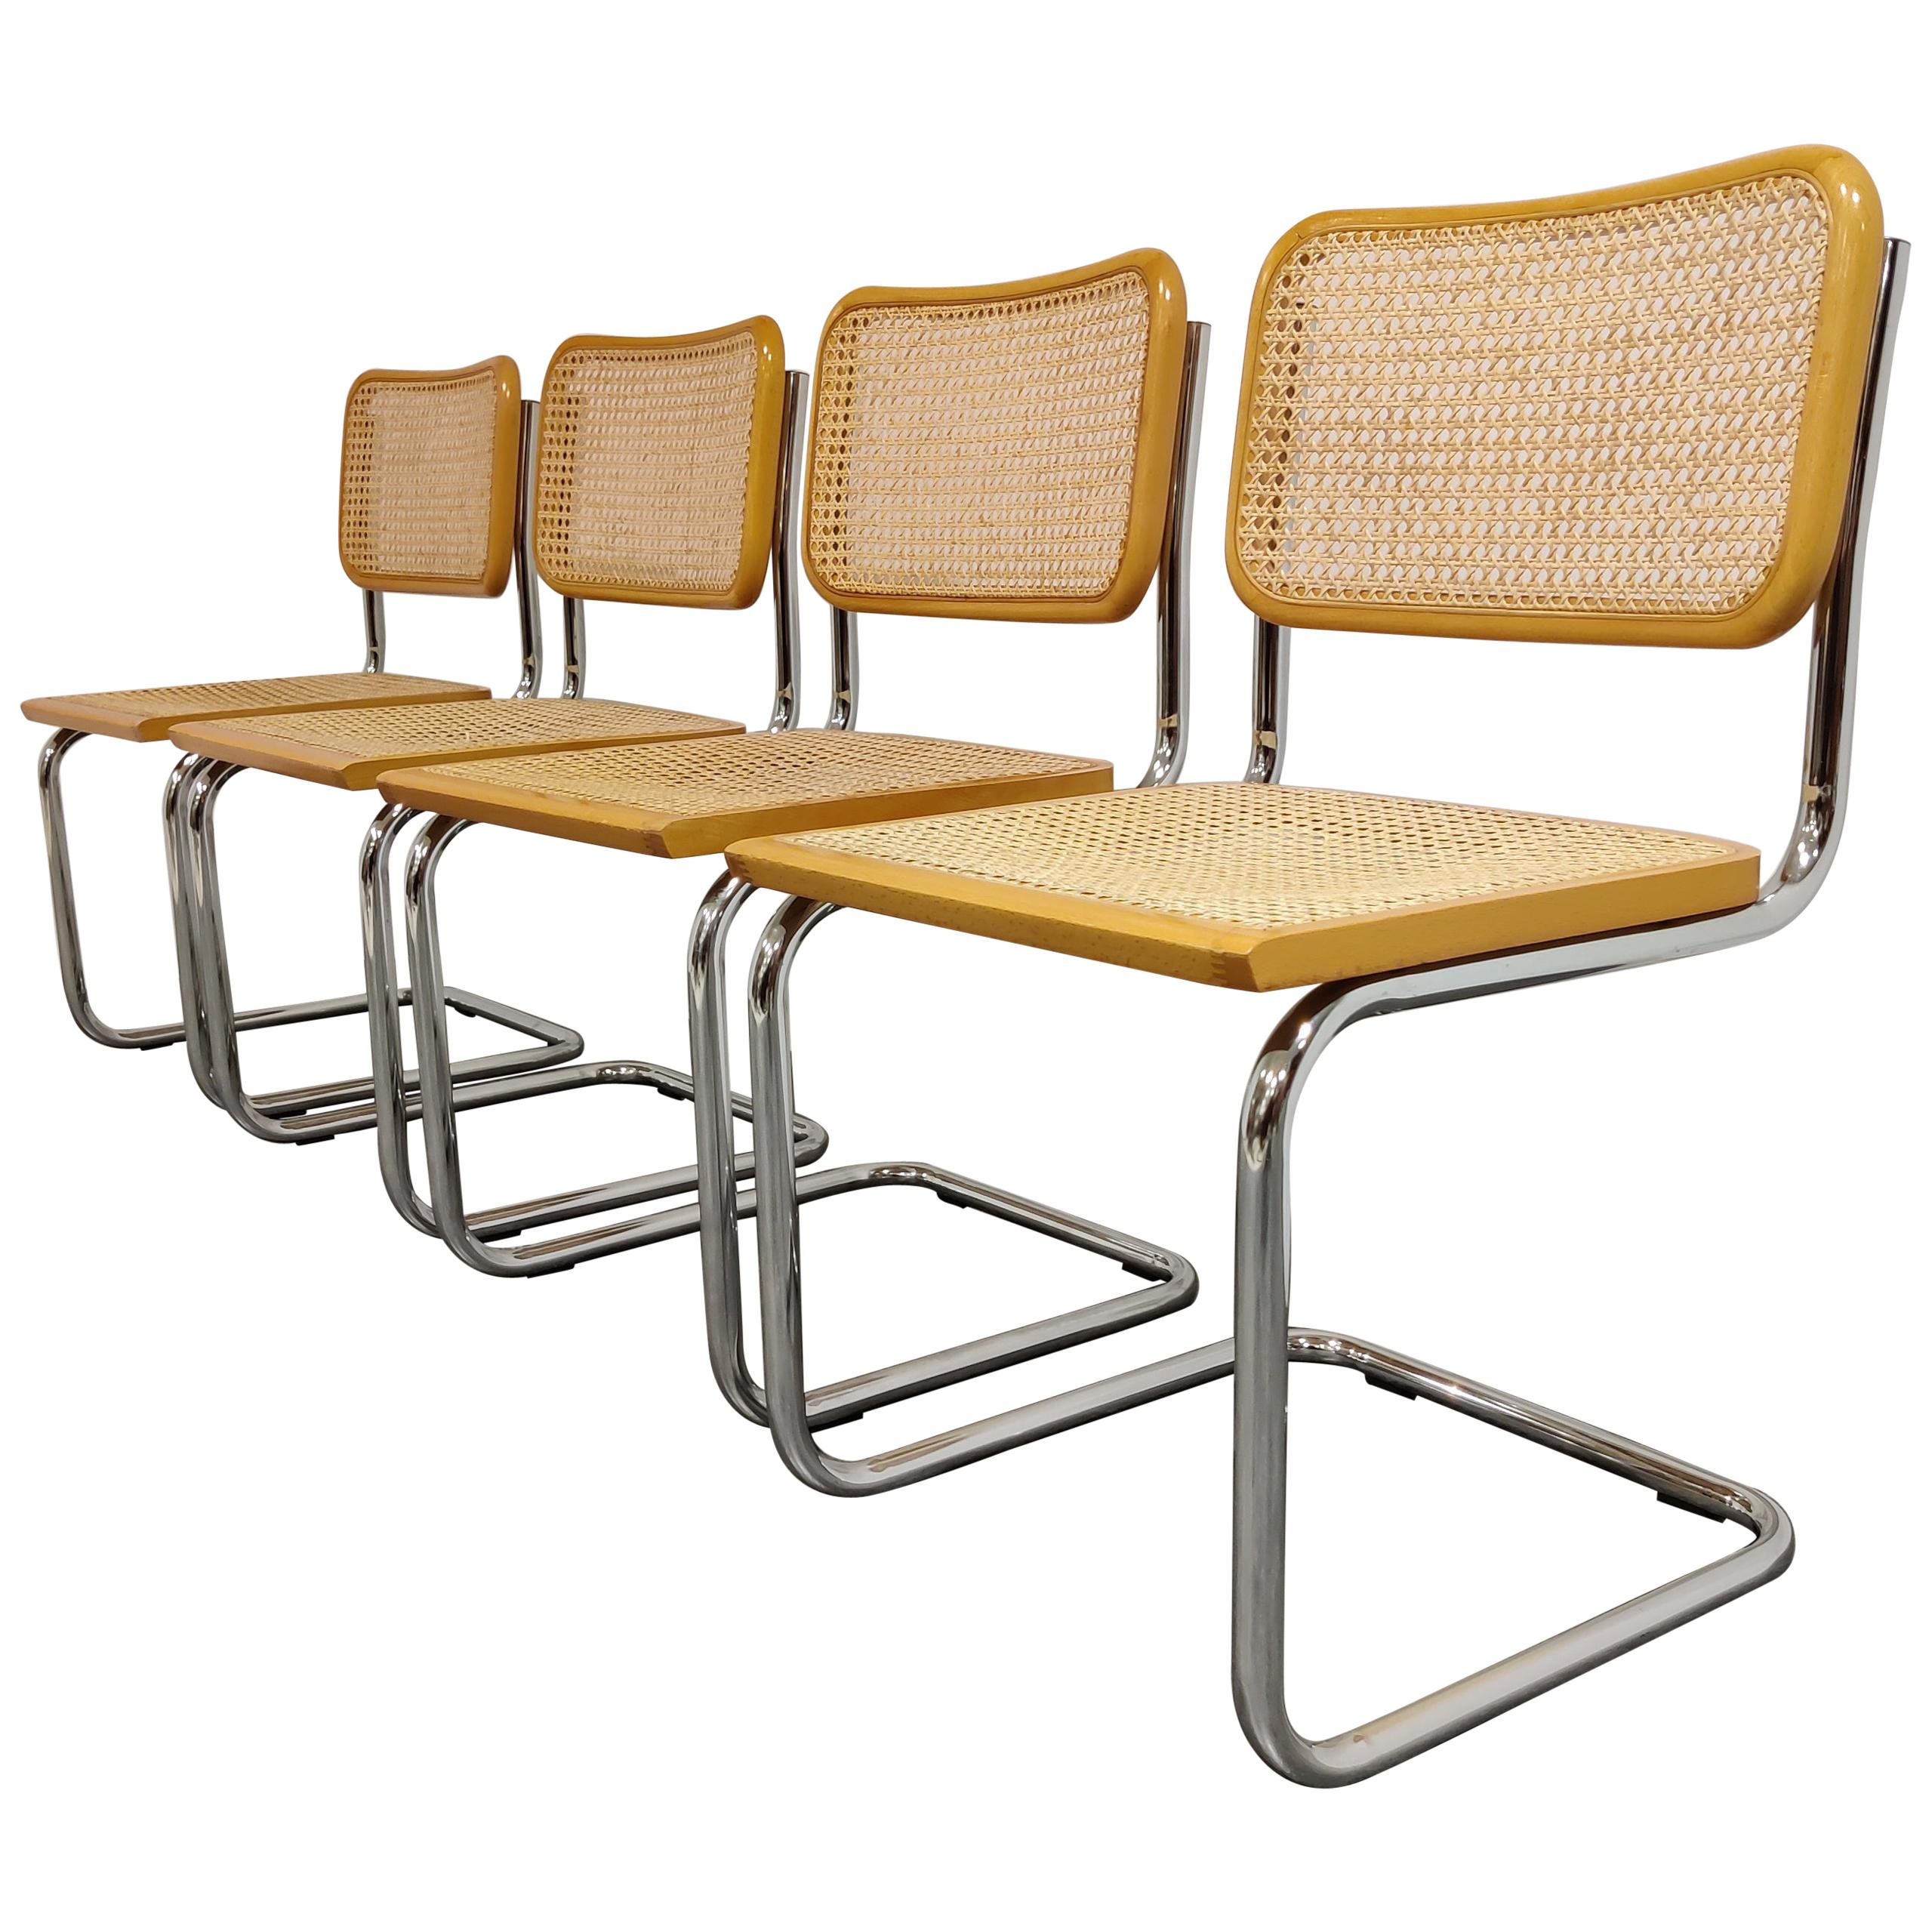 Set of 4 Vintage Marcel Breuer Cesca Chairs, Made in Italy, 1970s